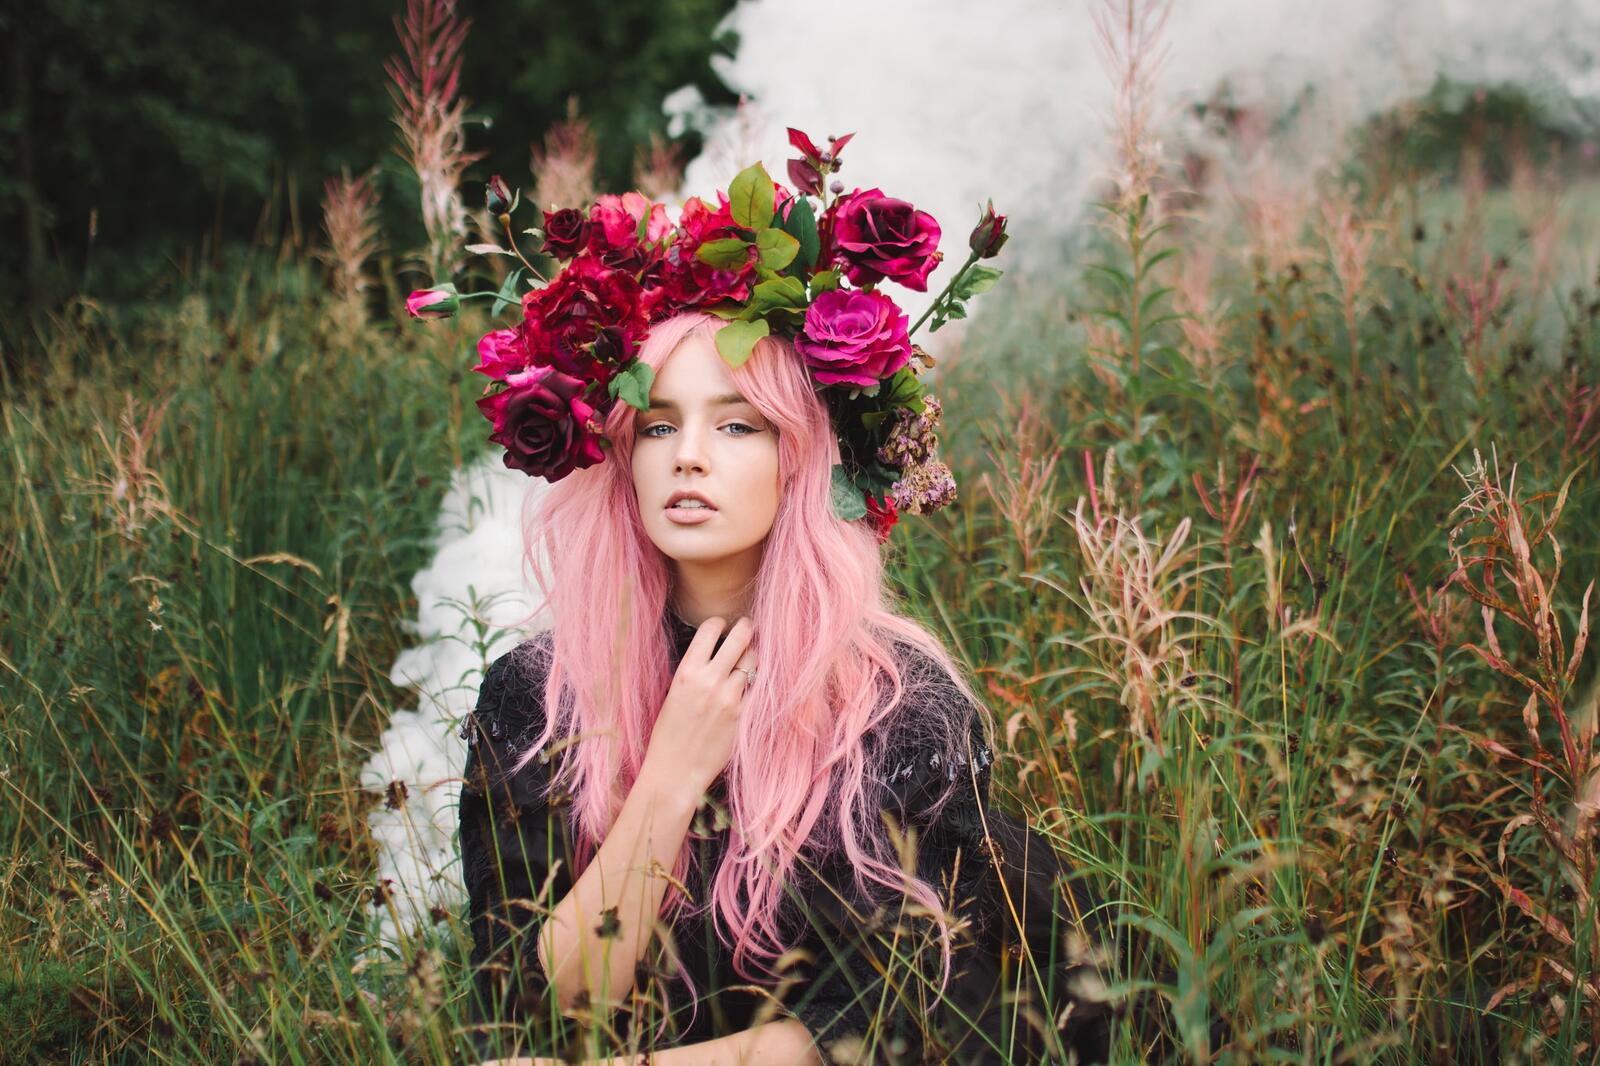 Free photo A girl with flowers in her hair